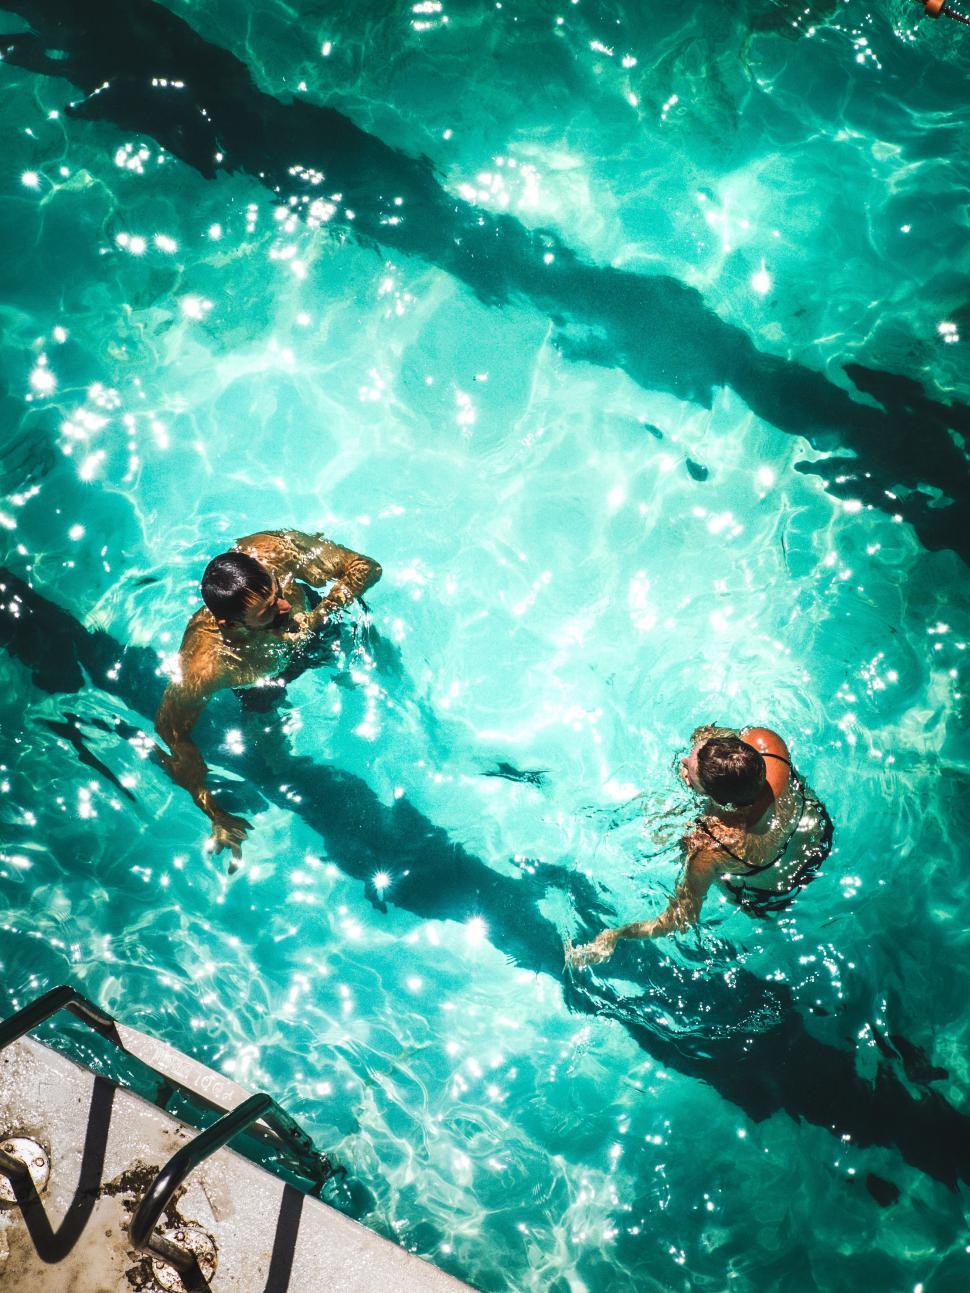 Free Image of People Swimming in a Pool 